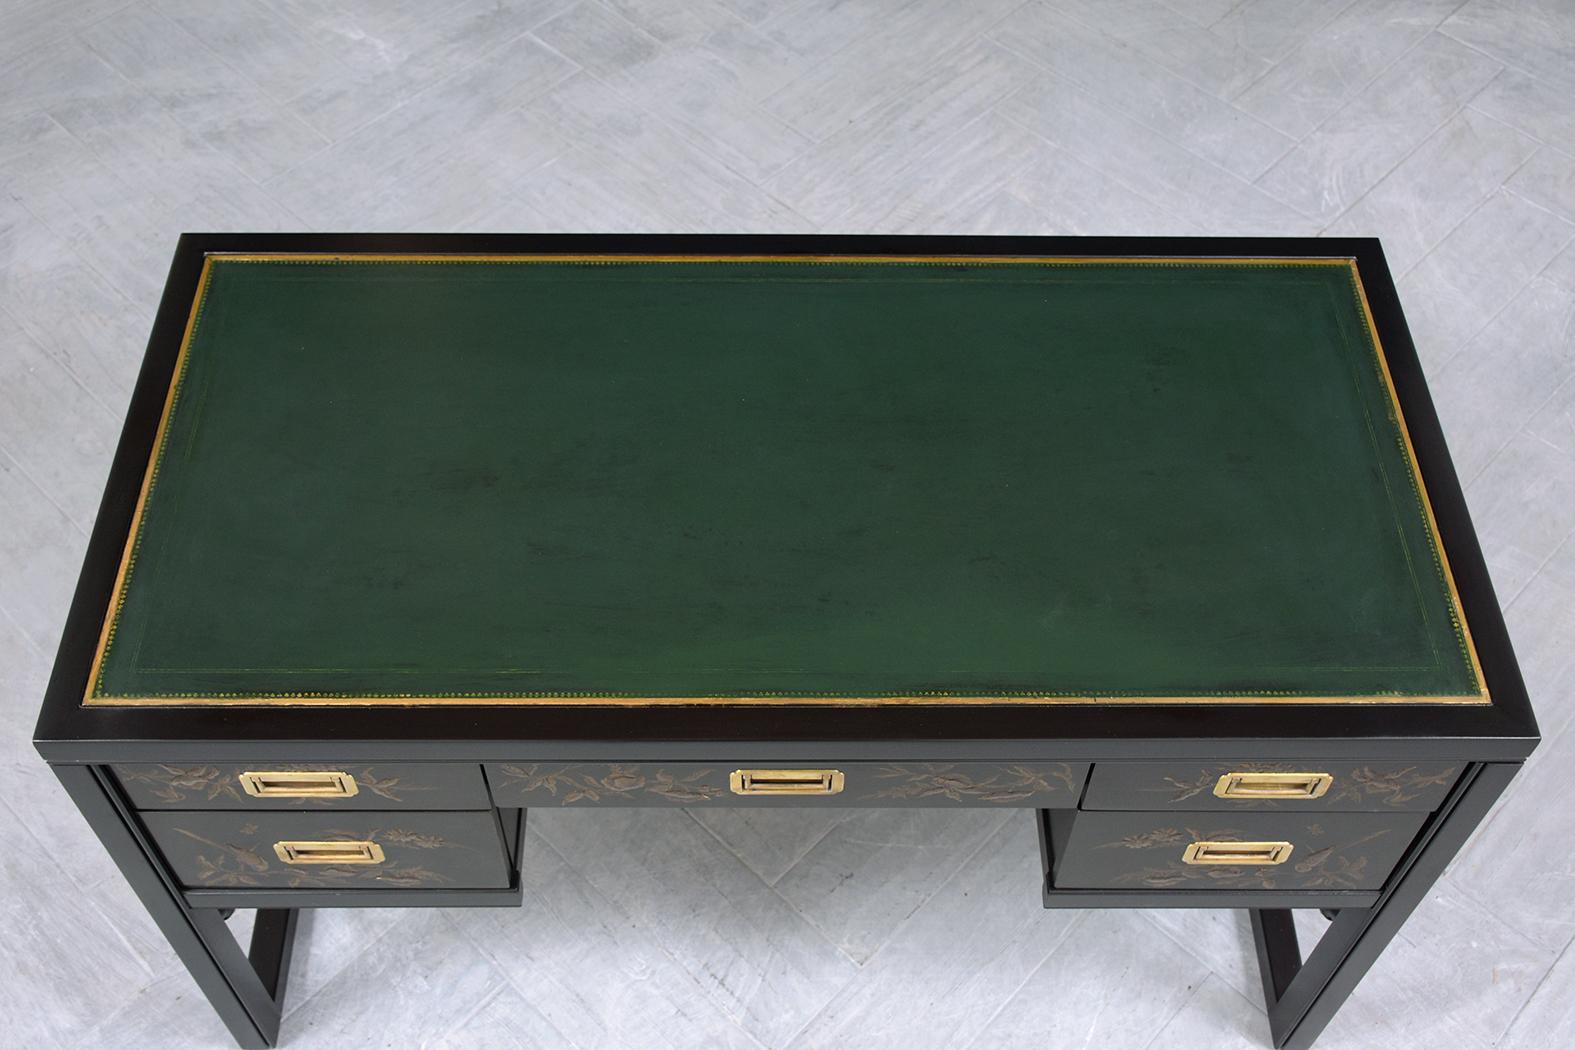 This extraordinary 1970s campaign desk is in good condition beautifully crafted out of mahogany wood and completely restored by our professional expert craftsmen team. This writing table features a dark green leather top accentuated by embossed gilt